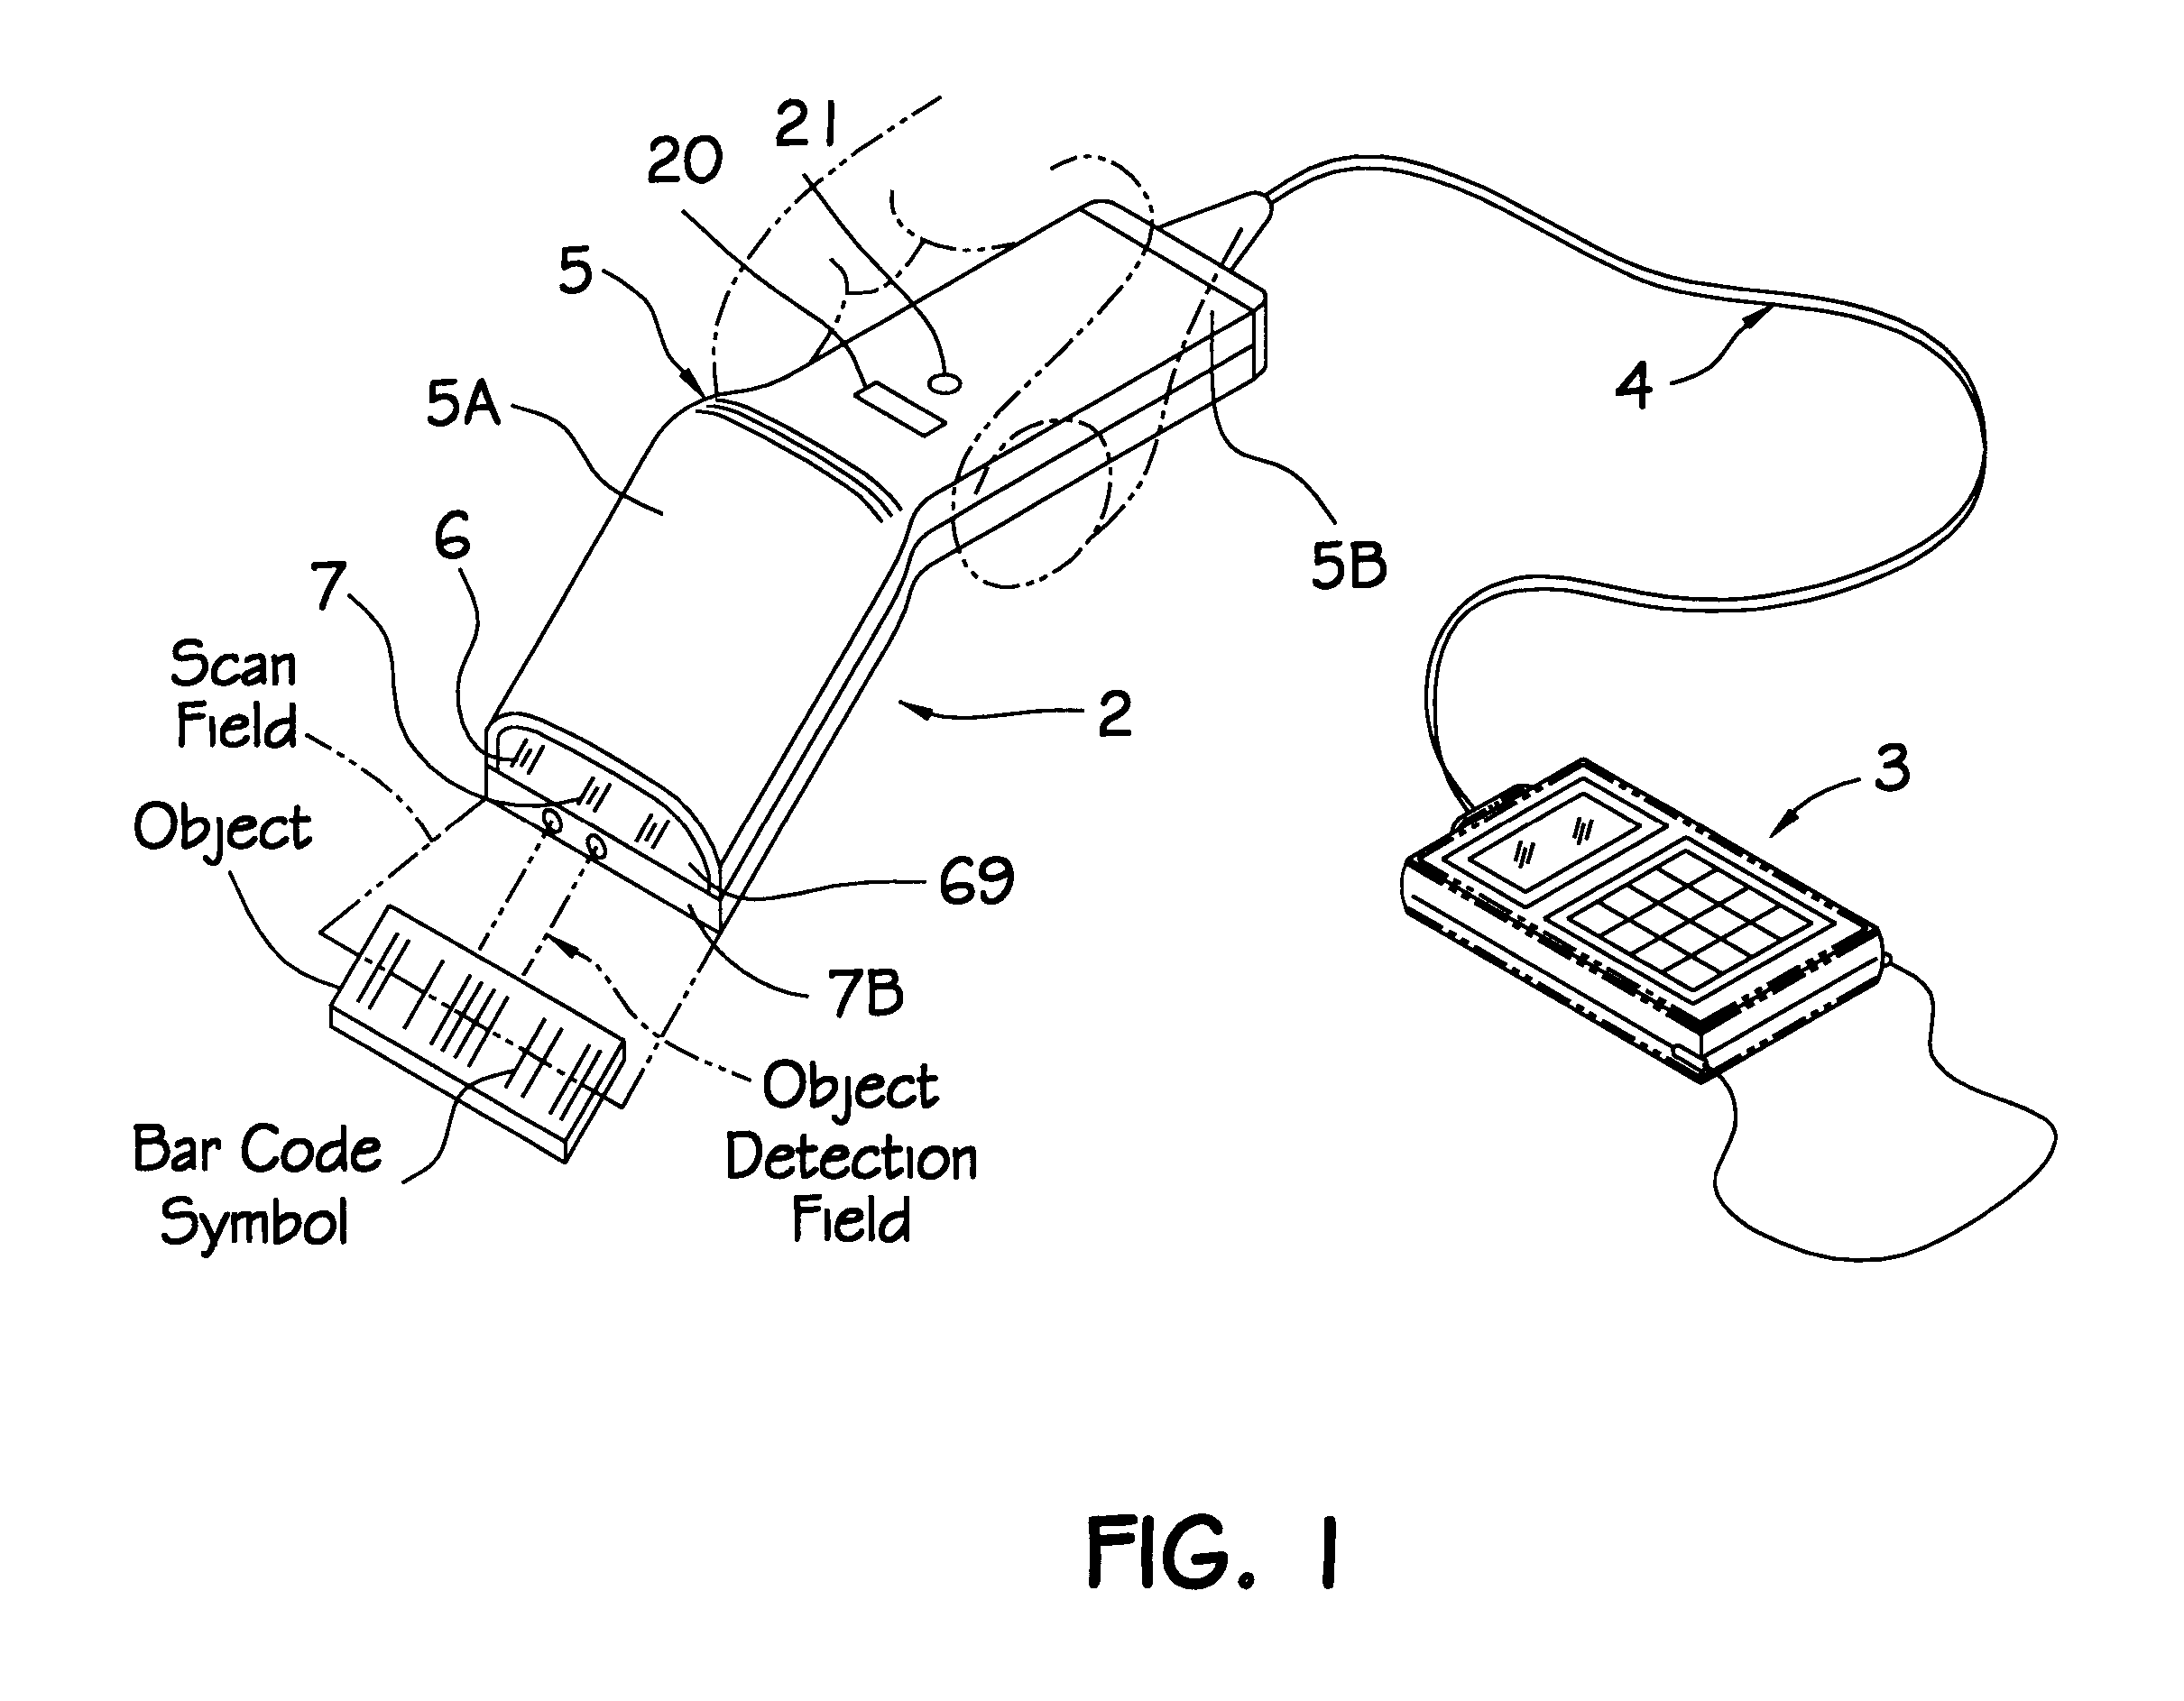 Optical filtering system for a laser bar code scanner having narrow band-pass characteristics employing spatially separated filtering elements including a scanner window